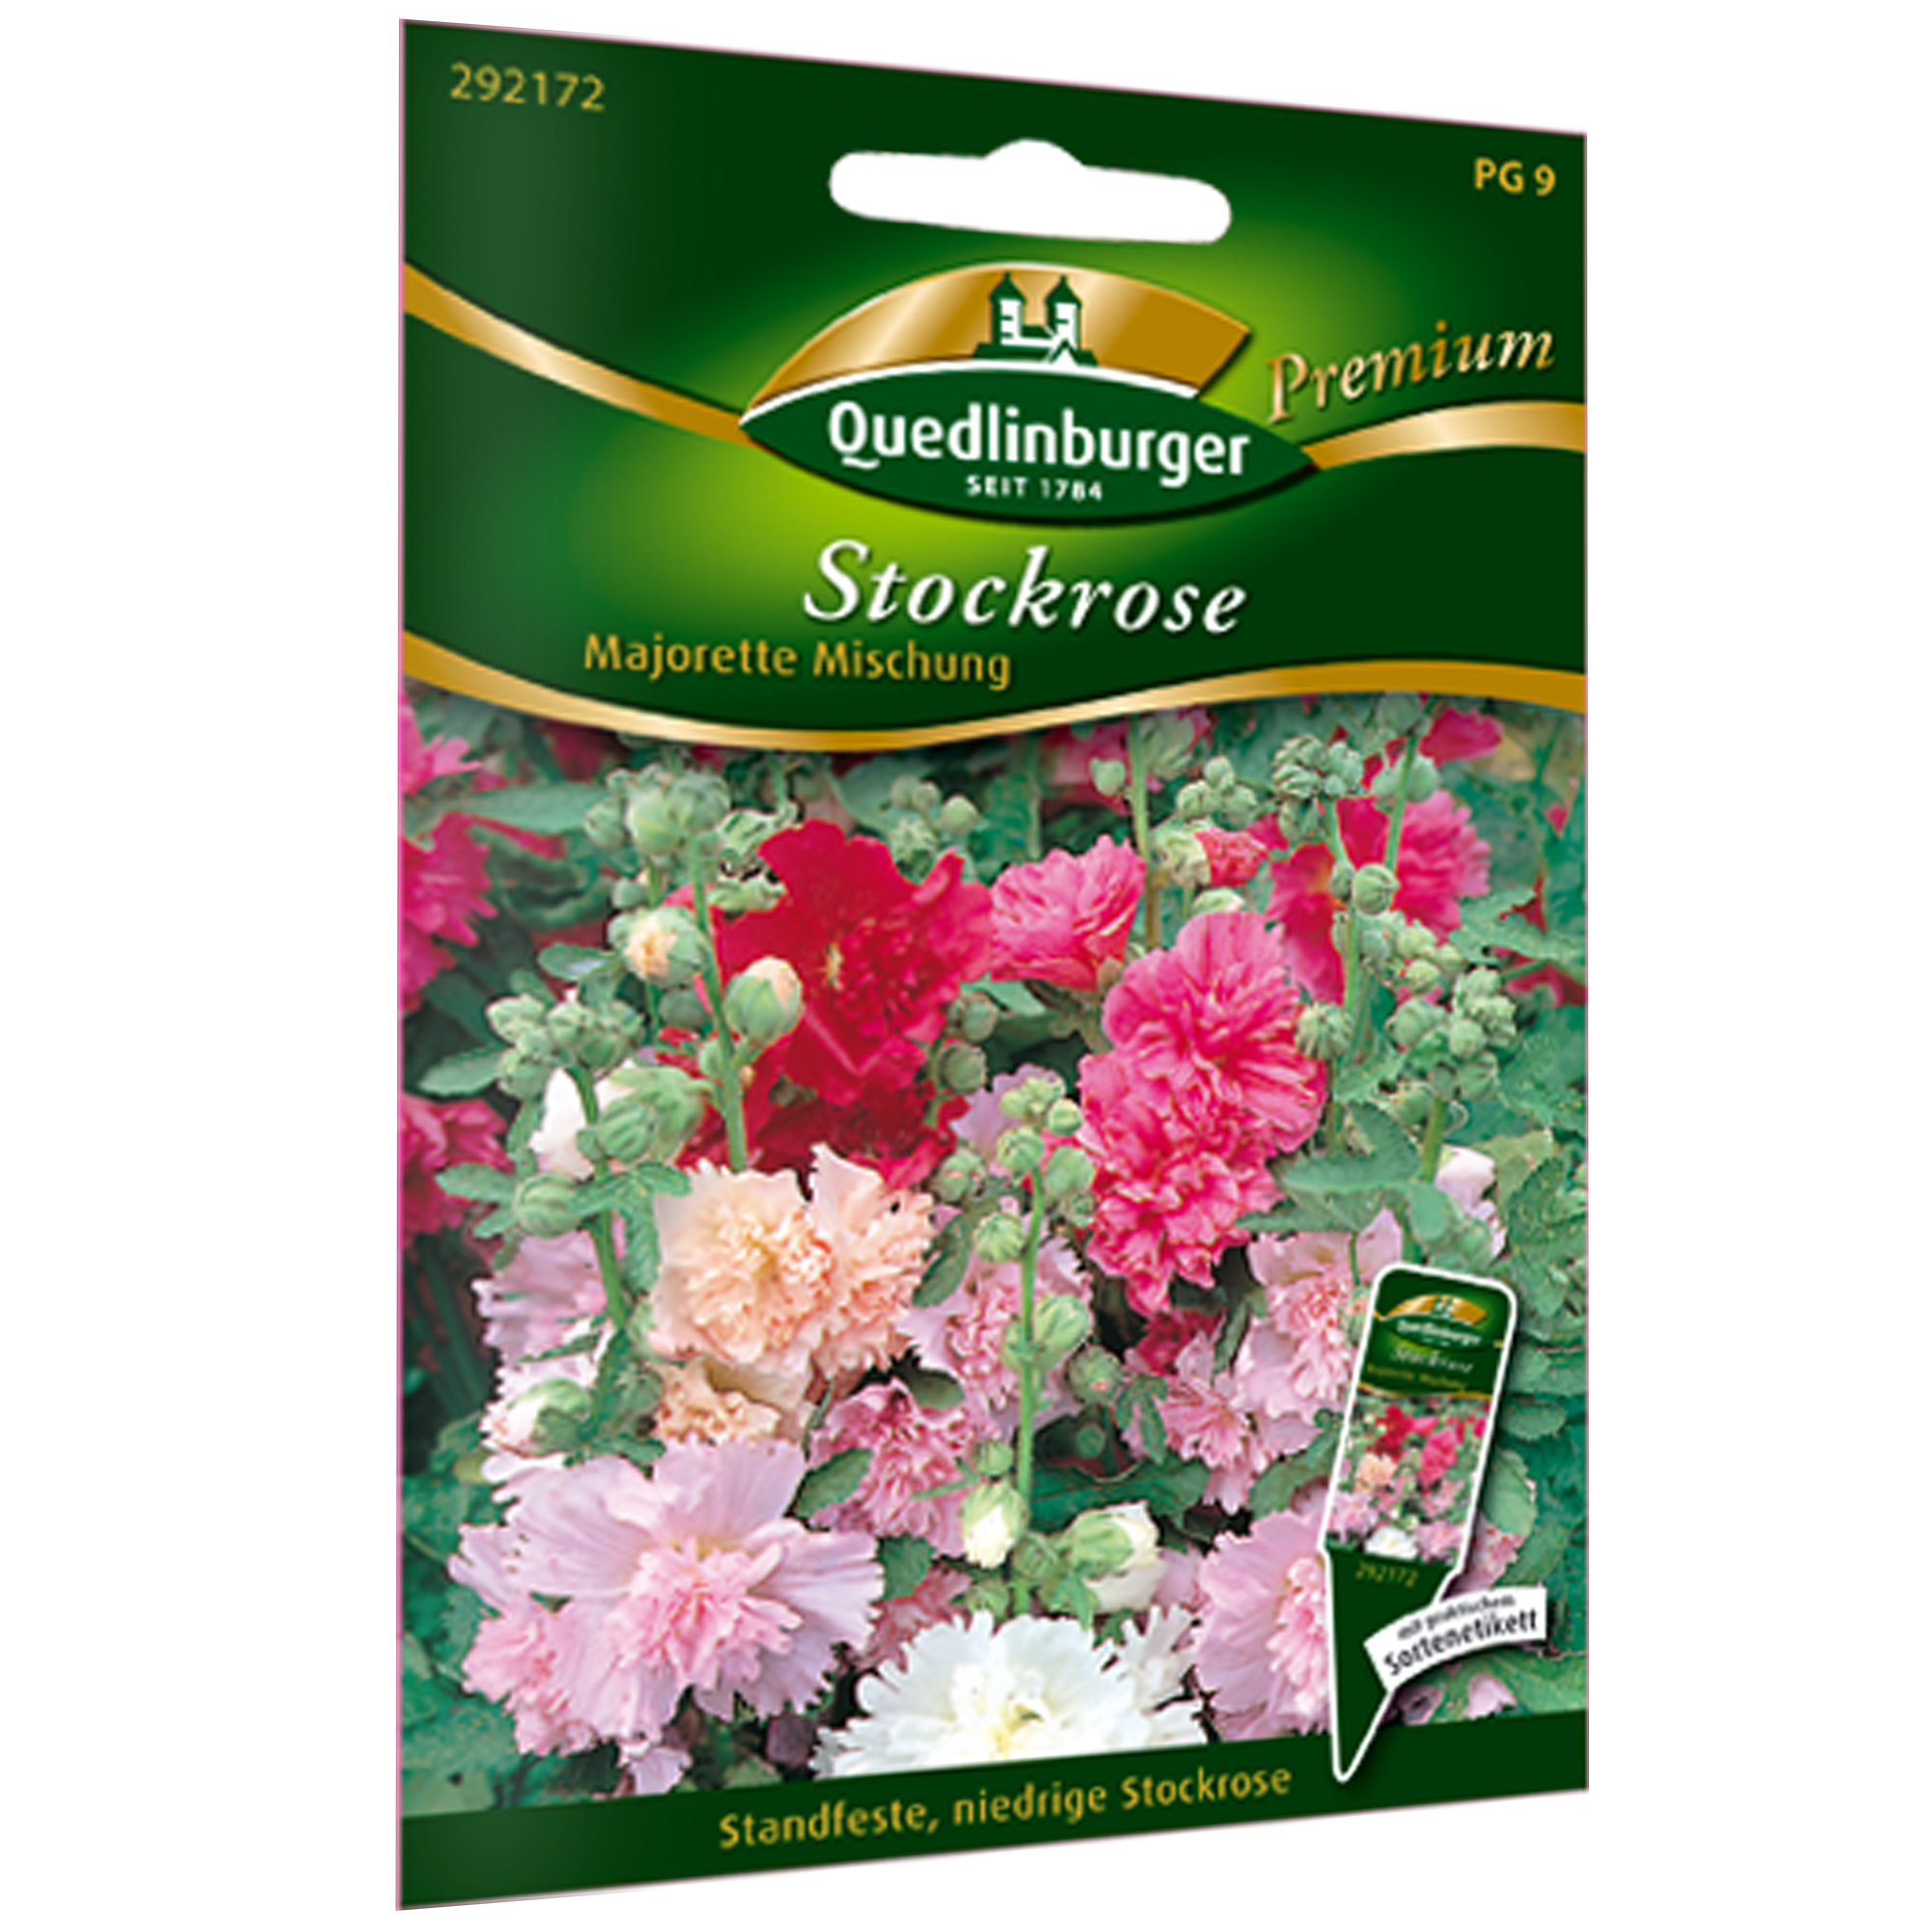 Stockrose 'Majorette' Mischung + product picture